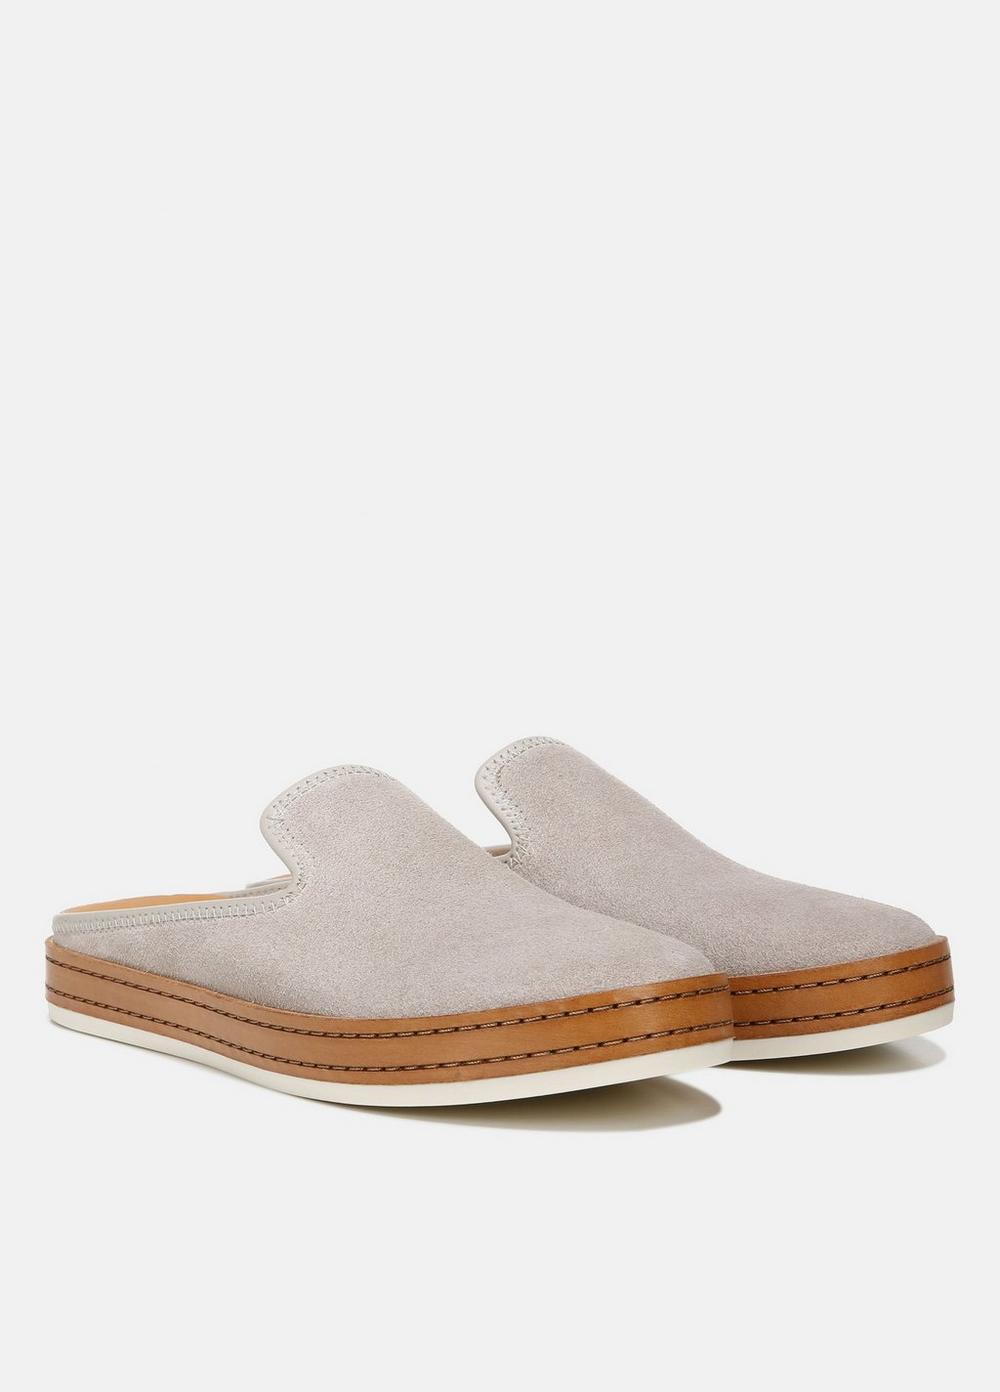 Canella Suede Backless Flat